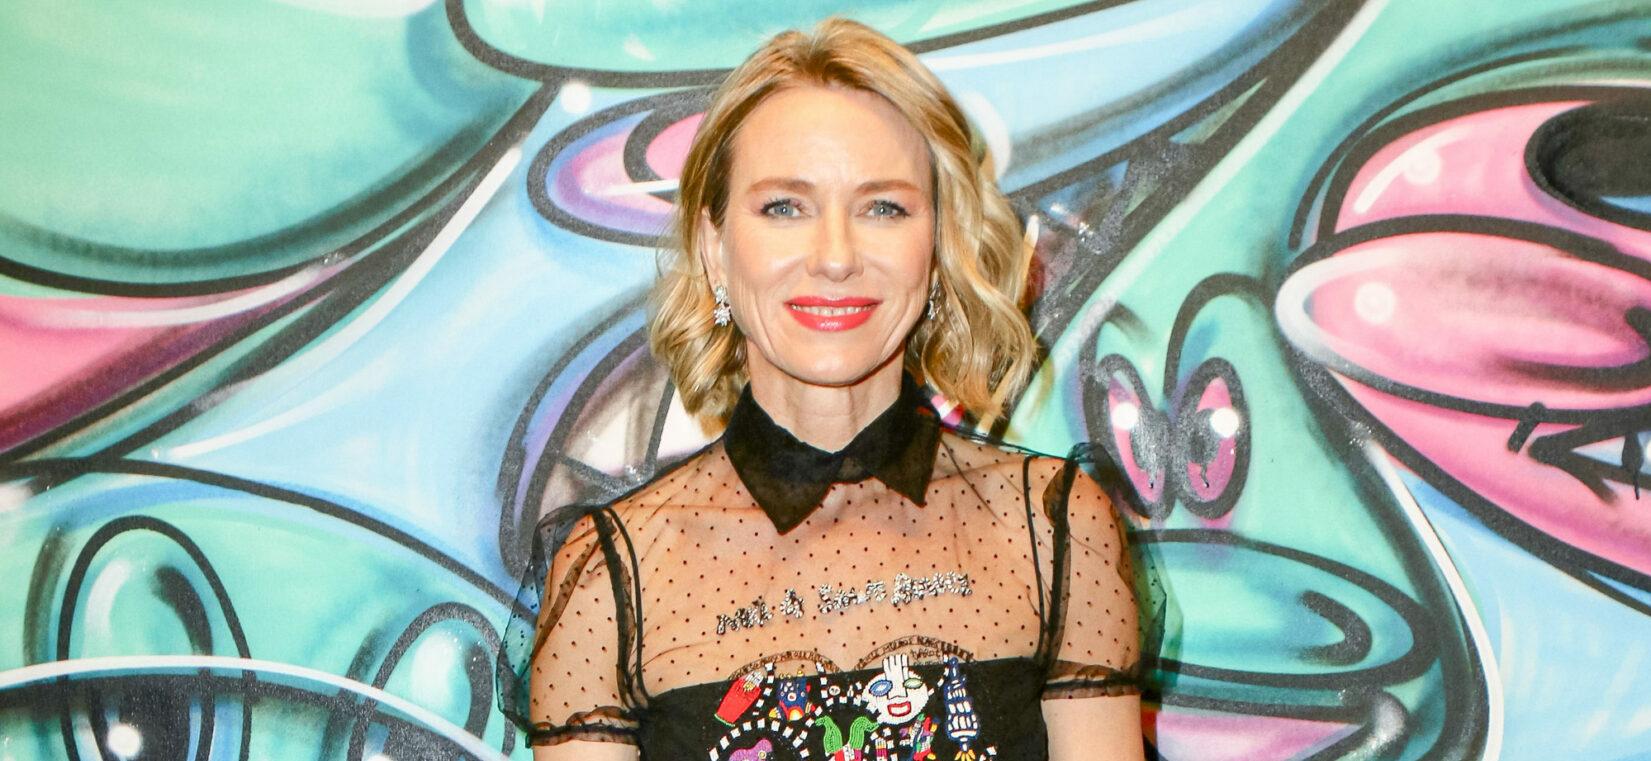 Naomi Watts wants to fix dry January, with lube!